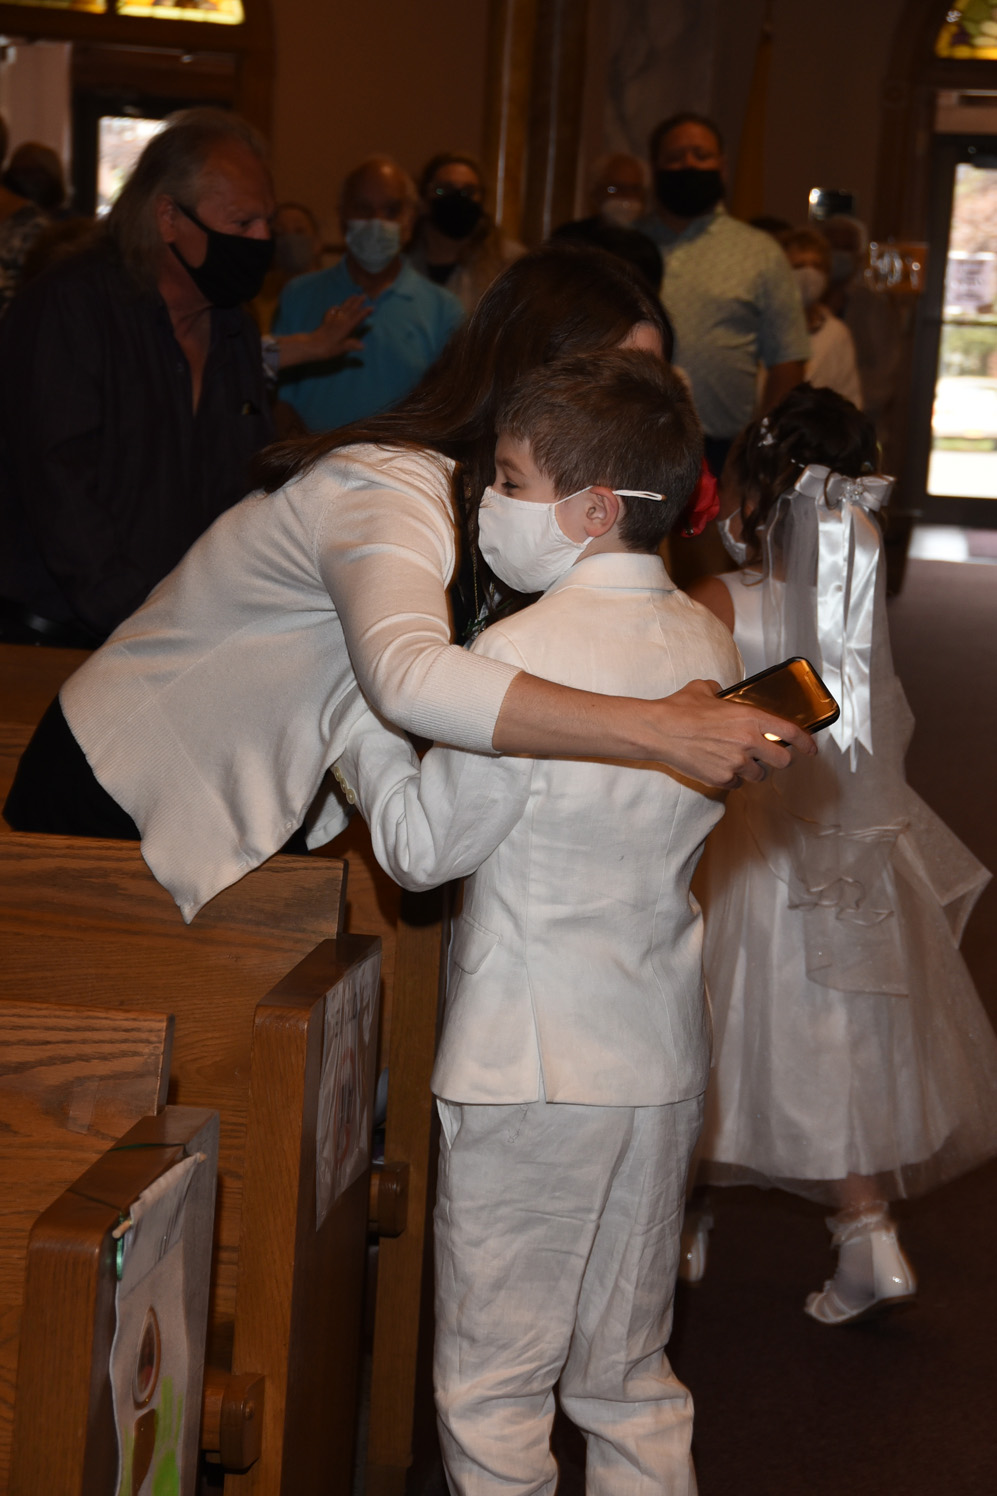 FIRST-COMMUNION-MAY-15-2021-10011108